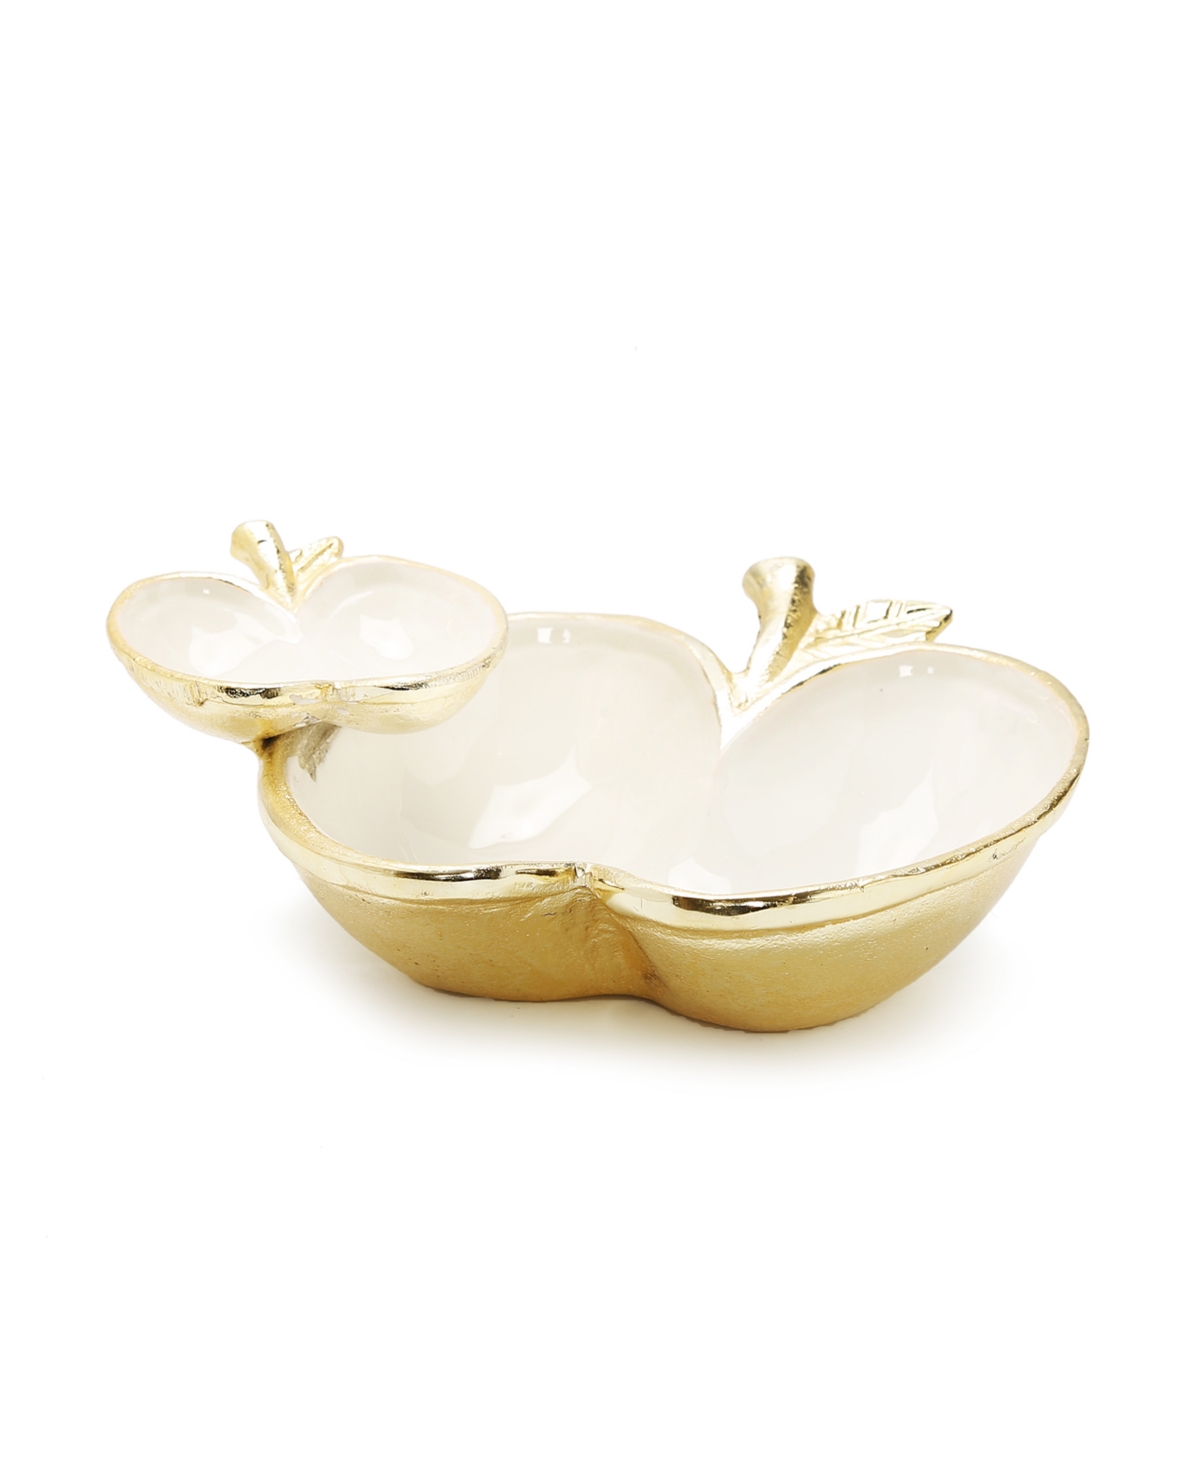 Two Apple Dish with Gold-Tone - White